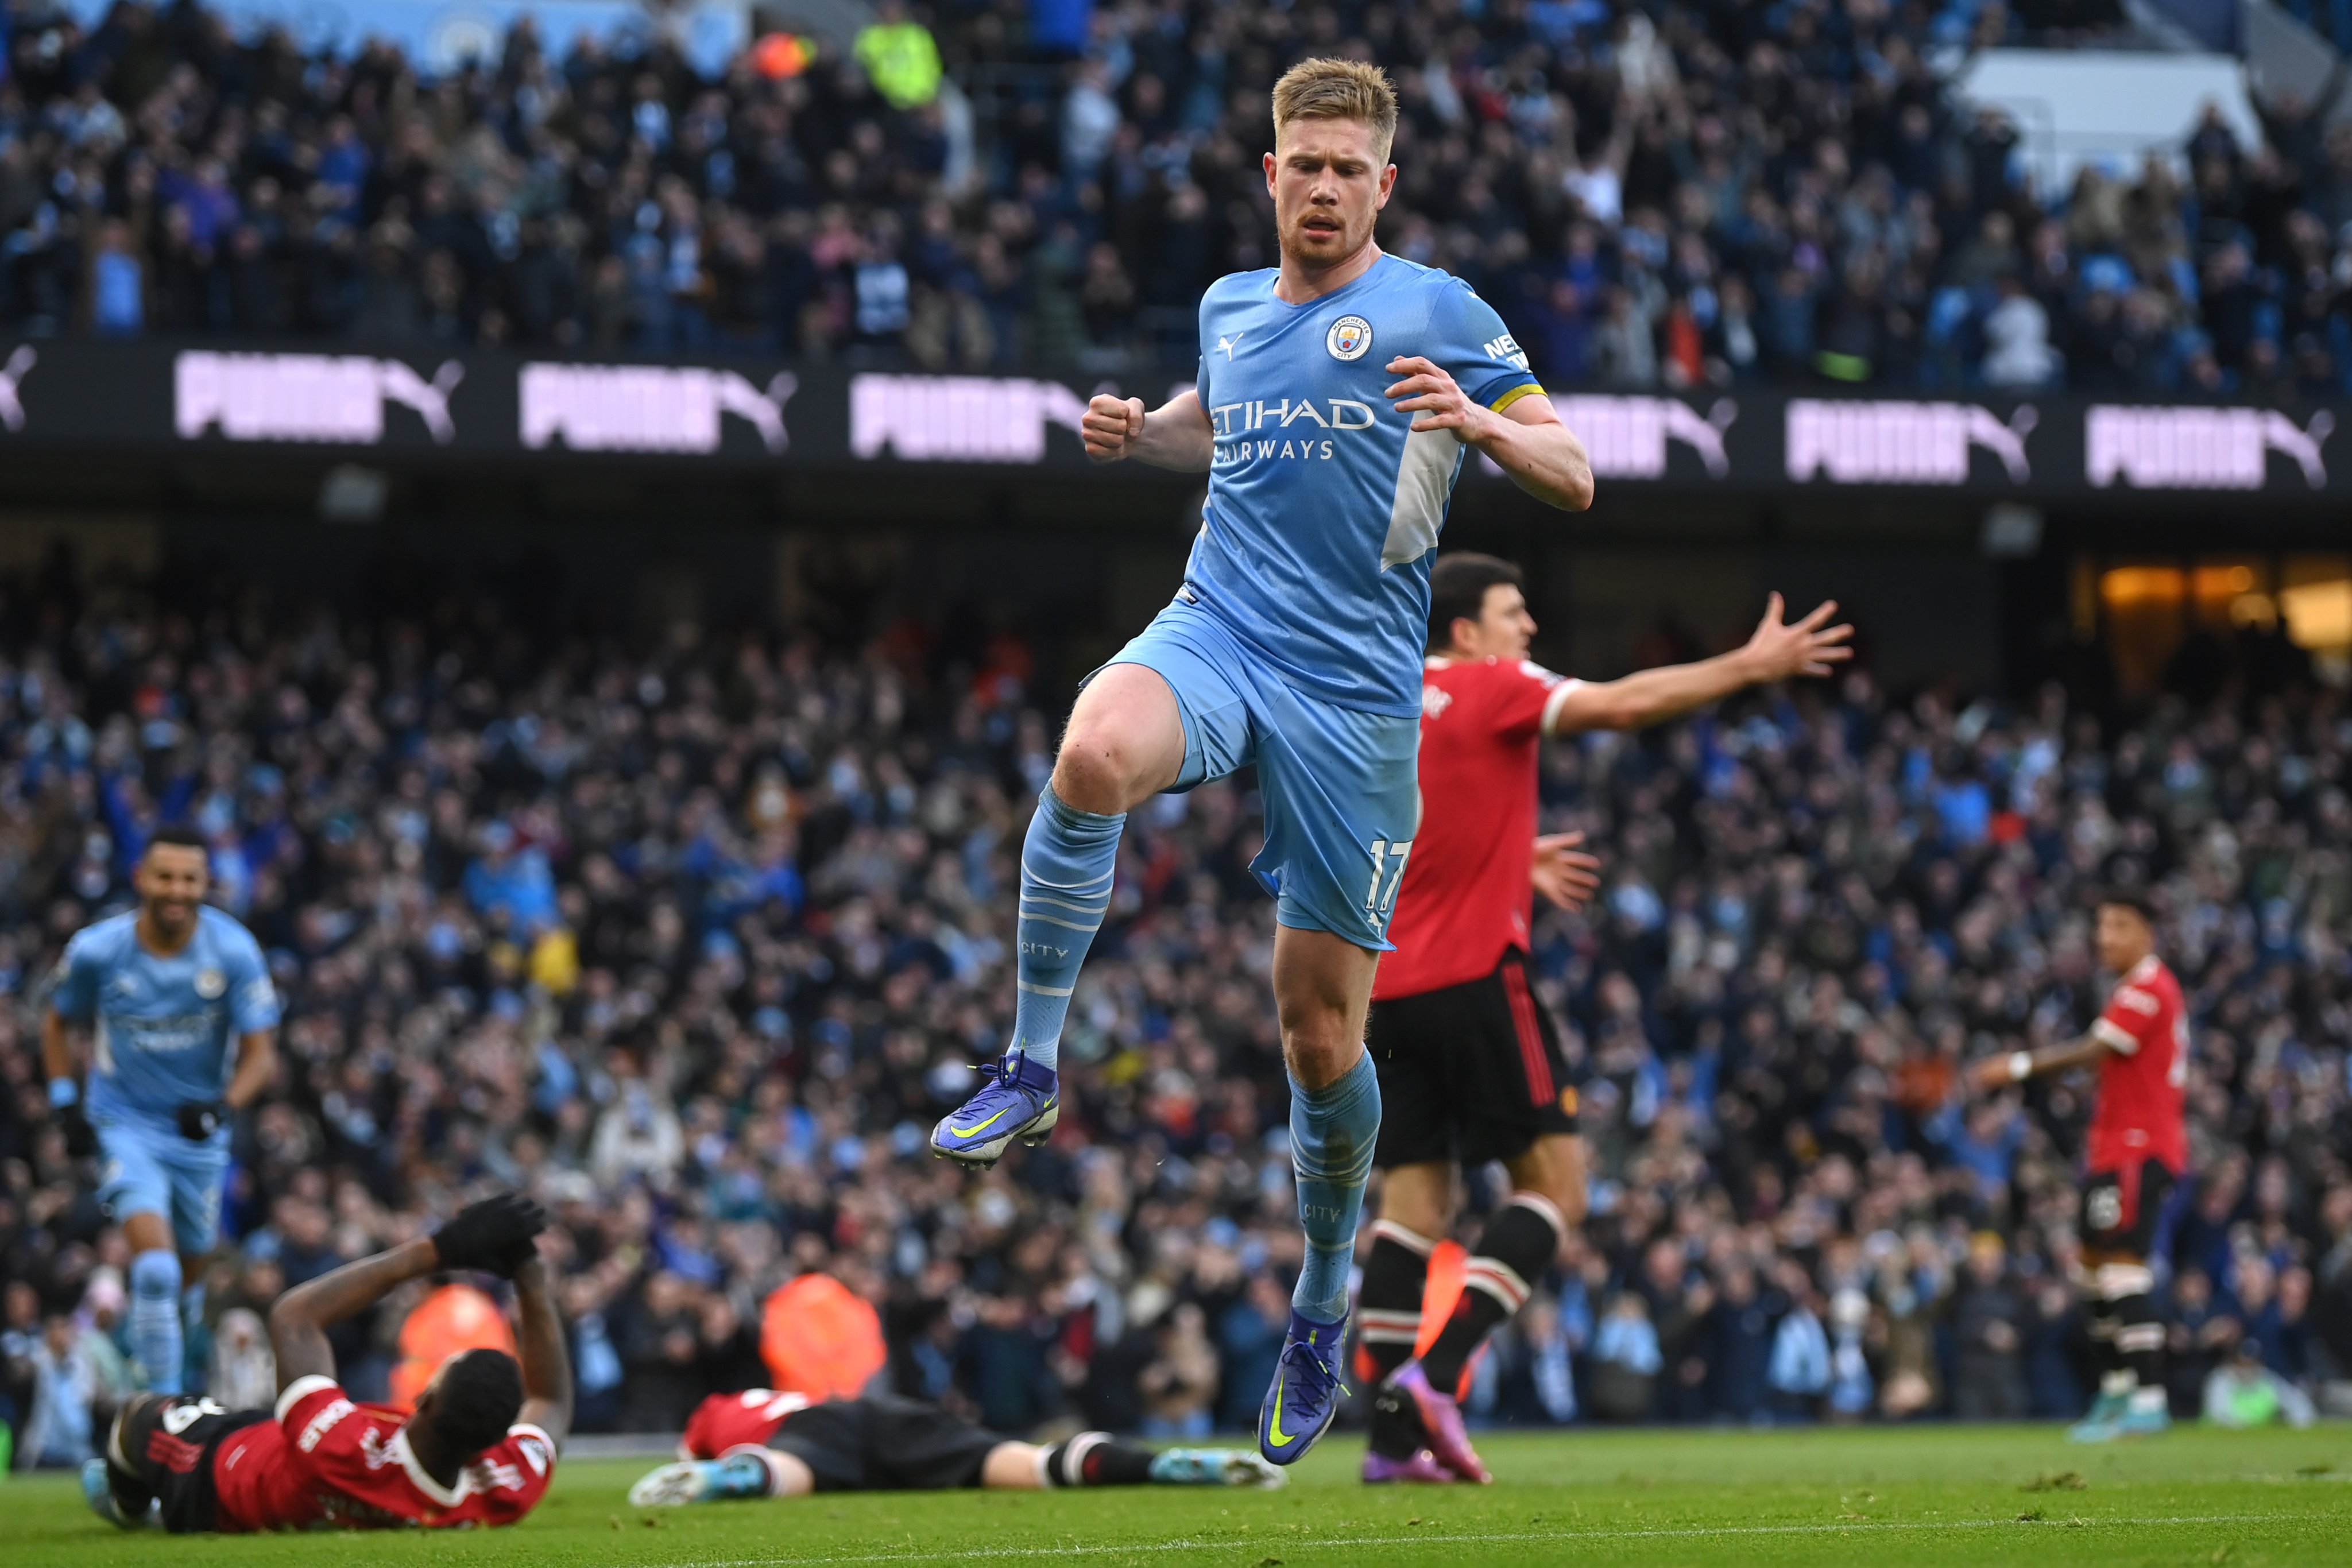 Manchester City 4-1 Manchester United: Man United’s fightback washed away by dominant Man City who extend their lead to six points as ‘Manchester is Blue’